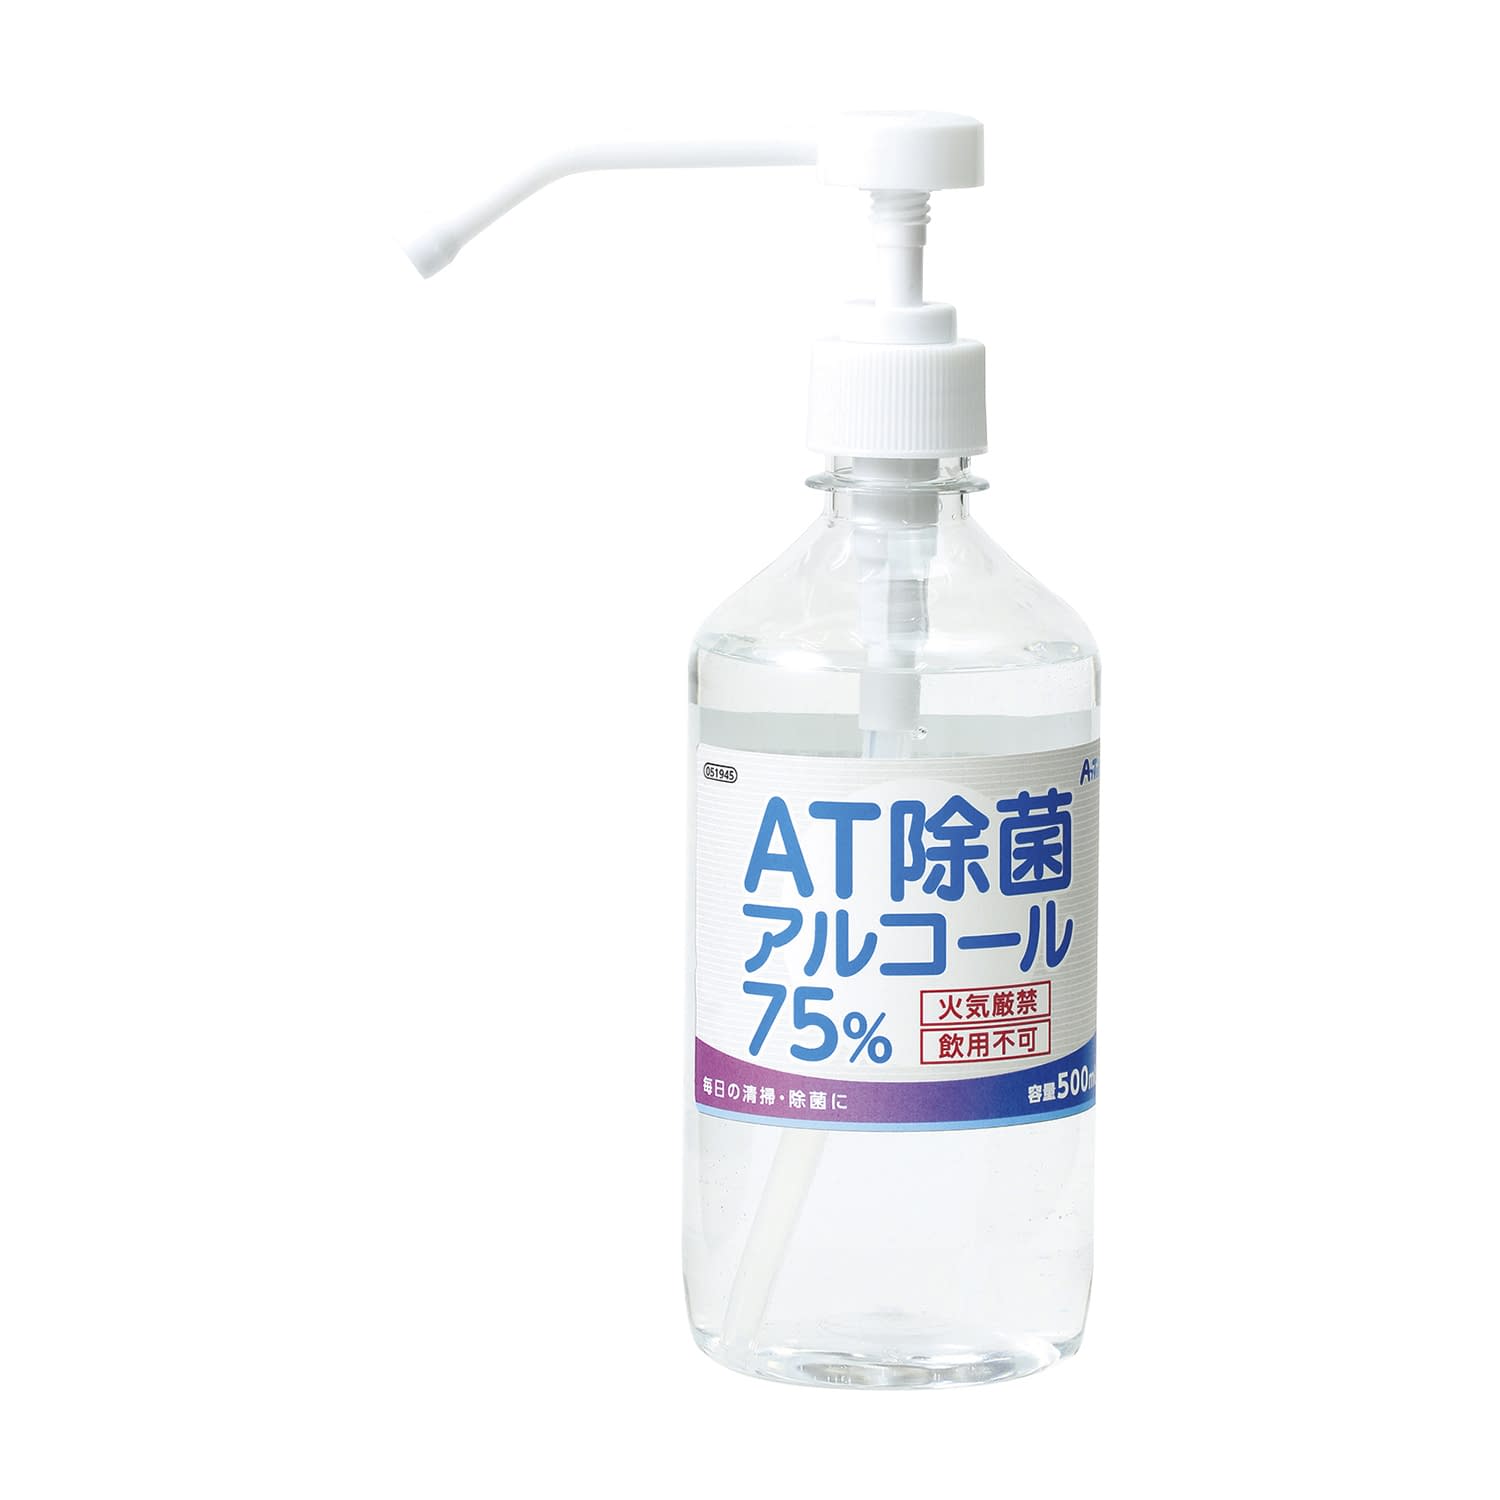 AT除菌75％アルコール 51945 500ML  殺菌消毒剤 25-2609-00500ml【アーテック】(51945)(25-2609-00)